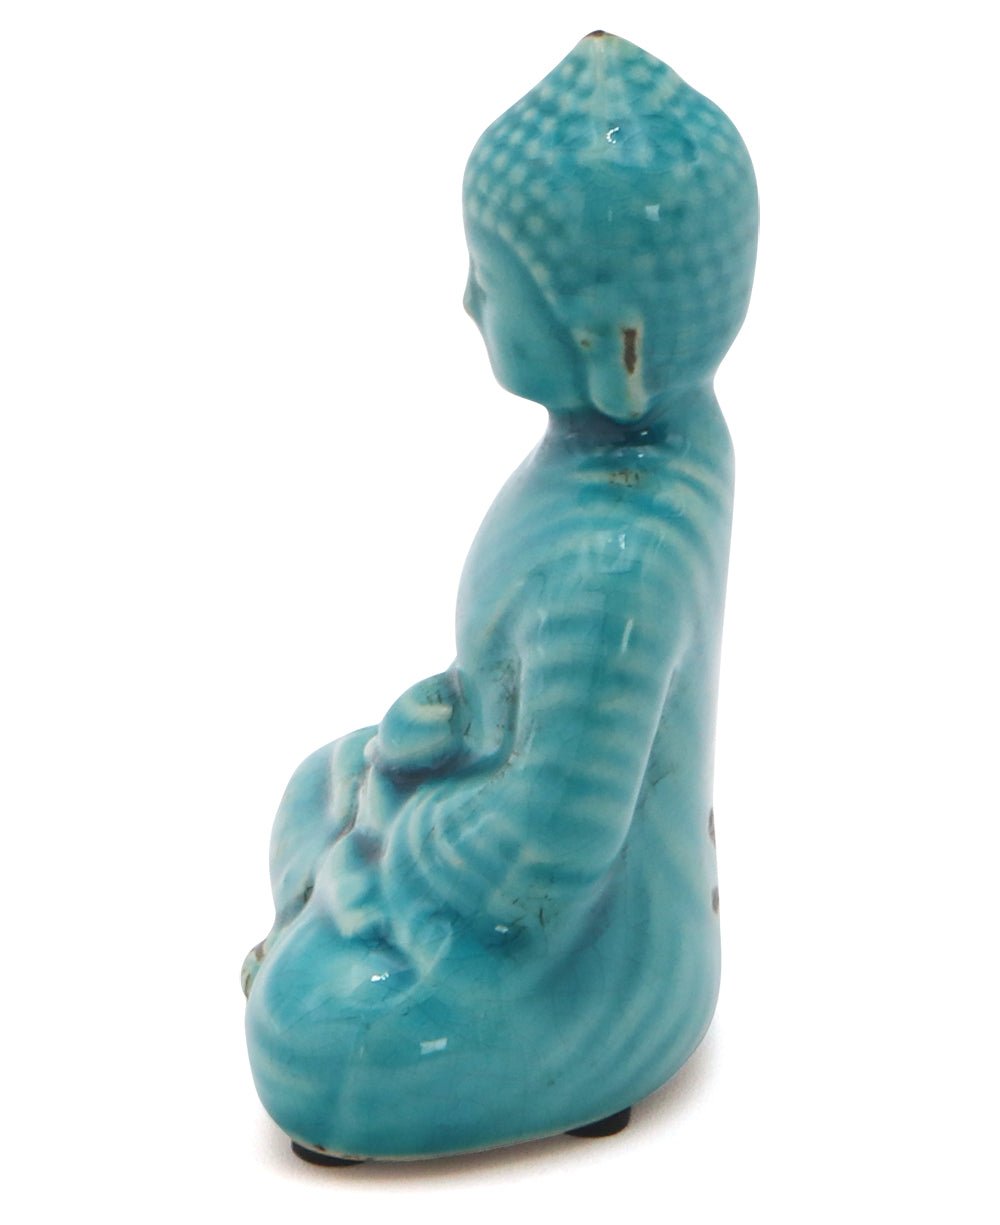 Turquoise Ceramic Buddha Statues, Set of 4 - Sculptures & Statues